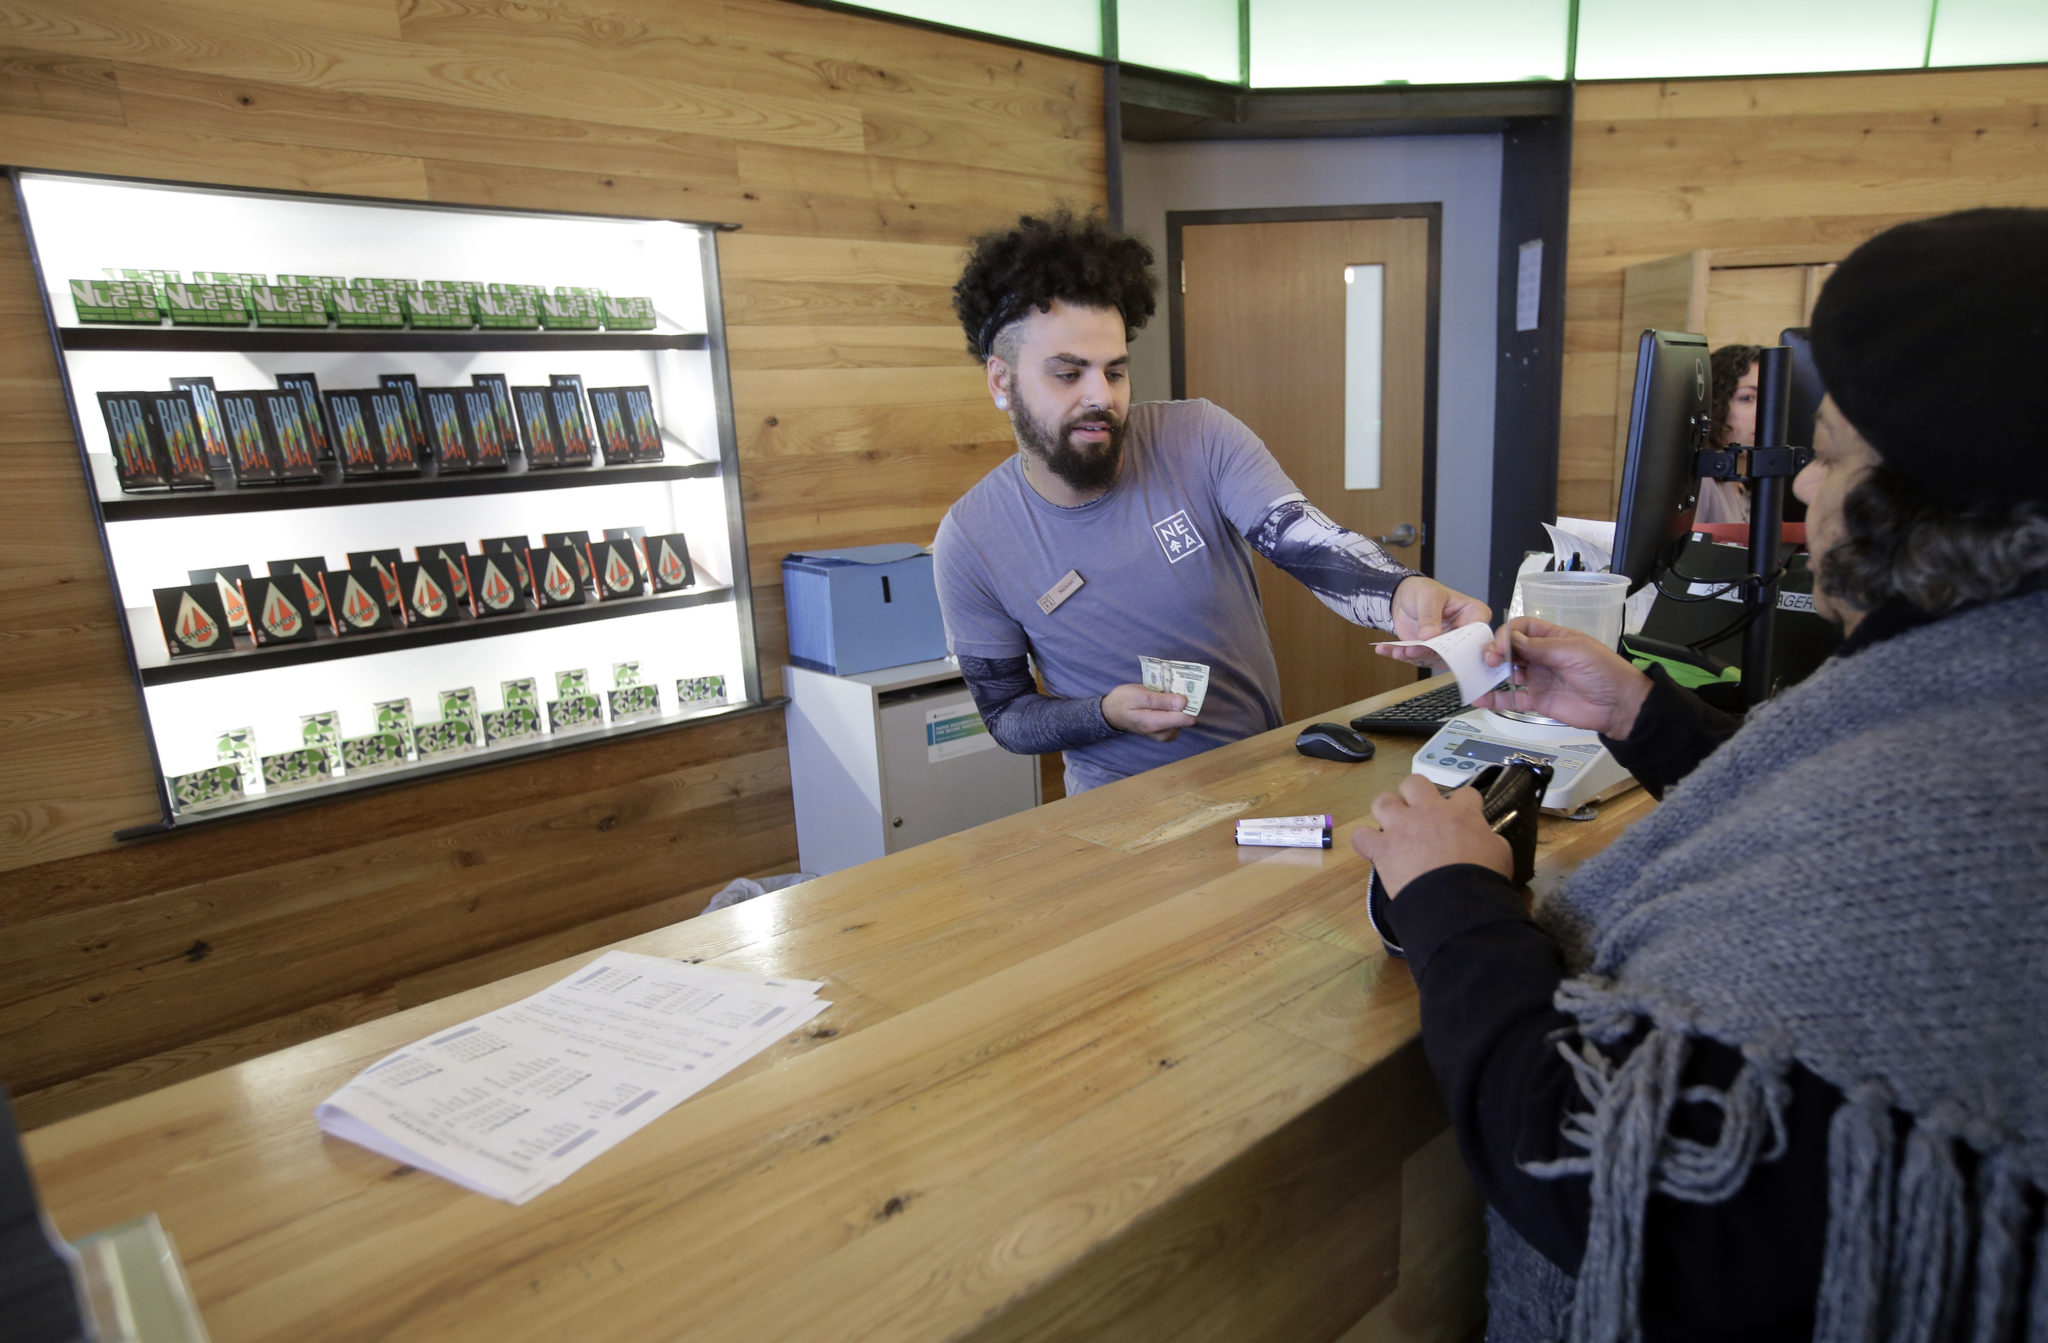 After Long Wait, 1st Legal Cannabis Shops On East Coast To Open